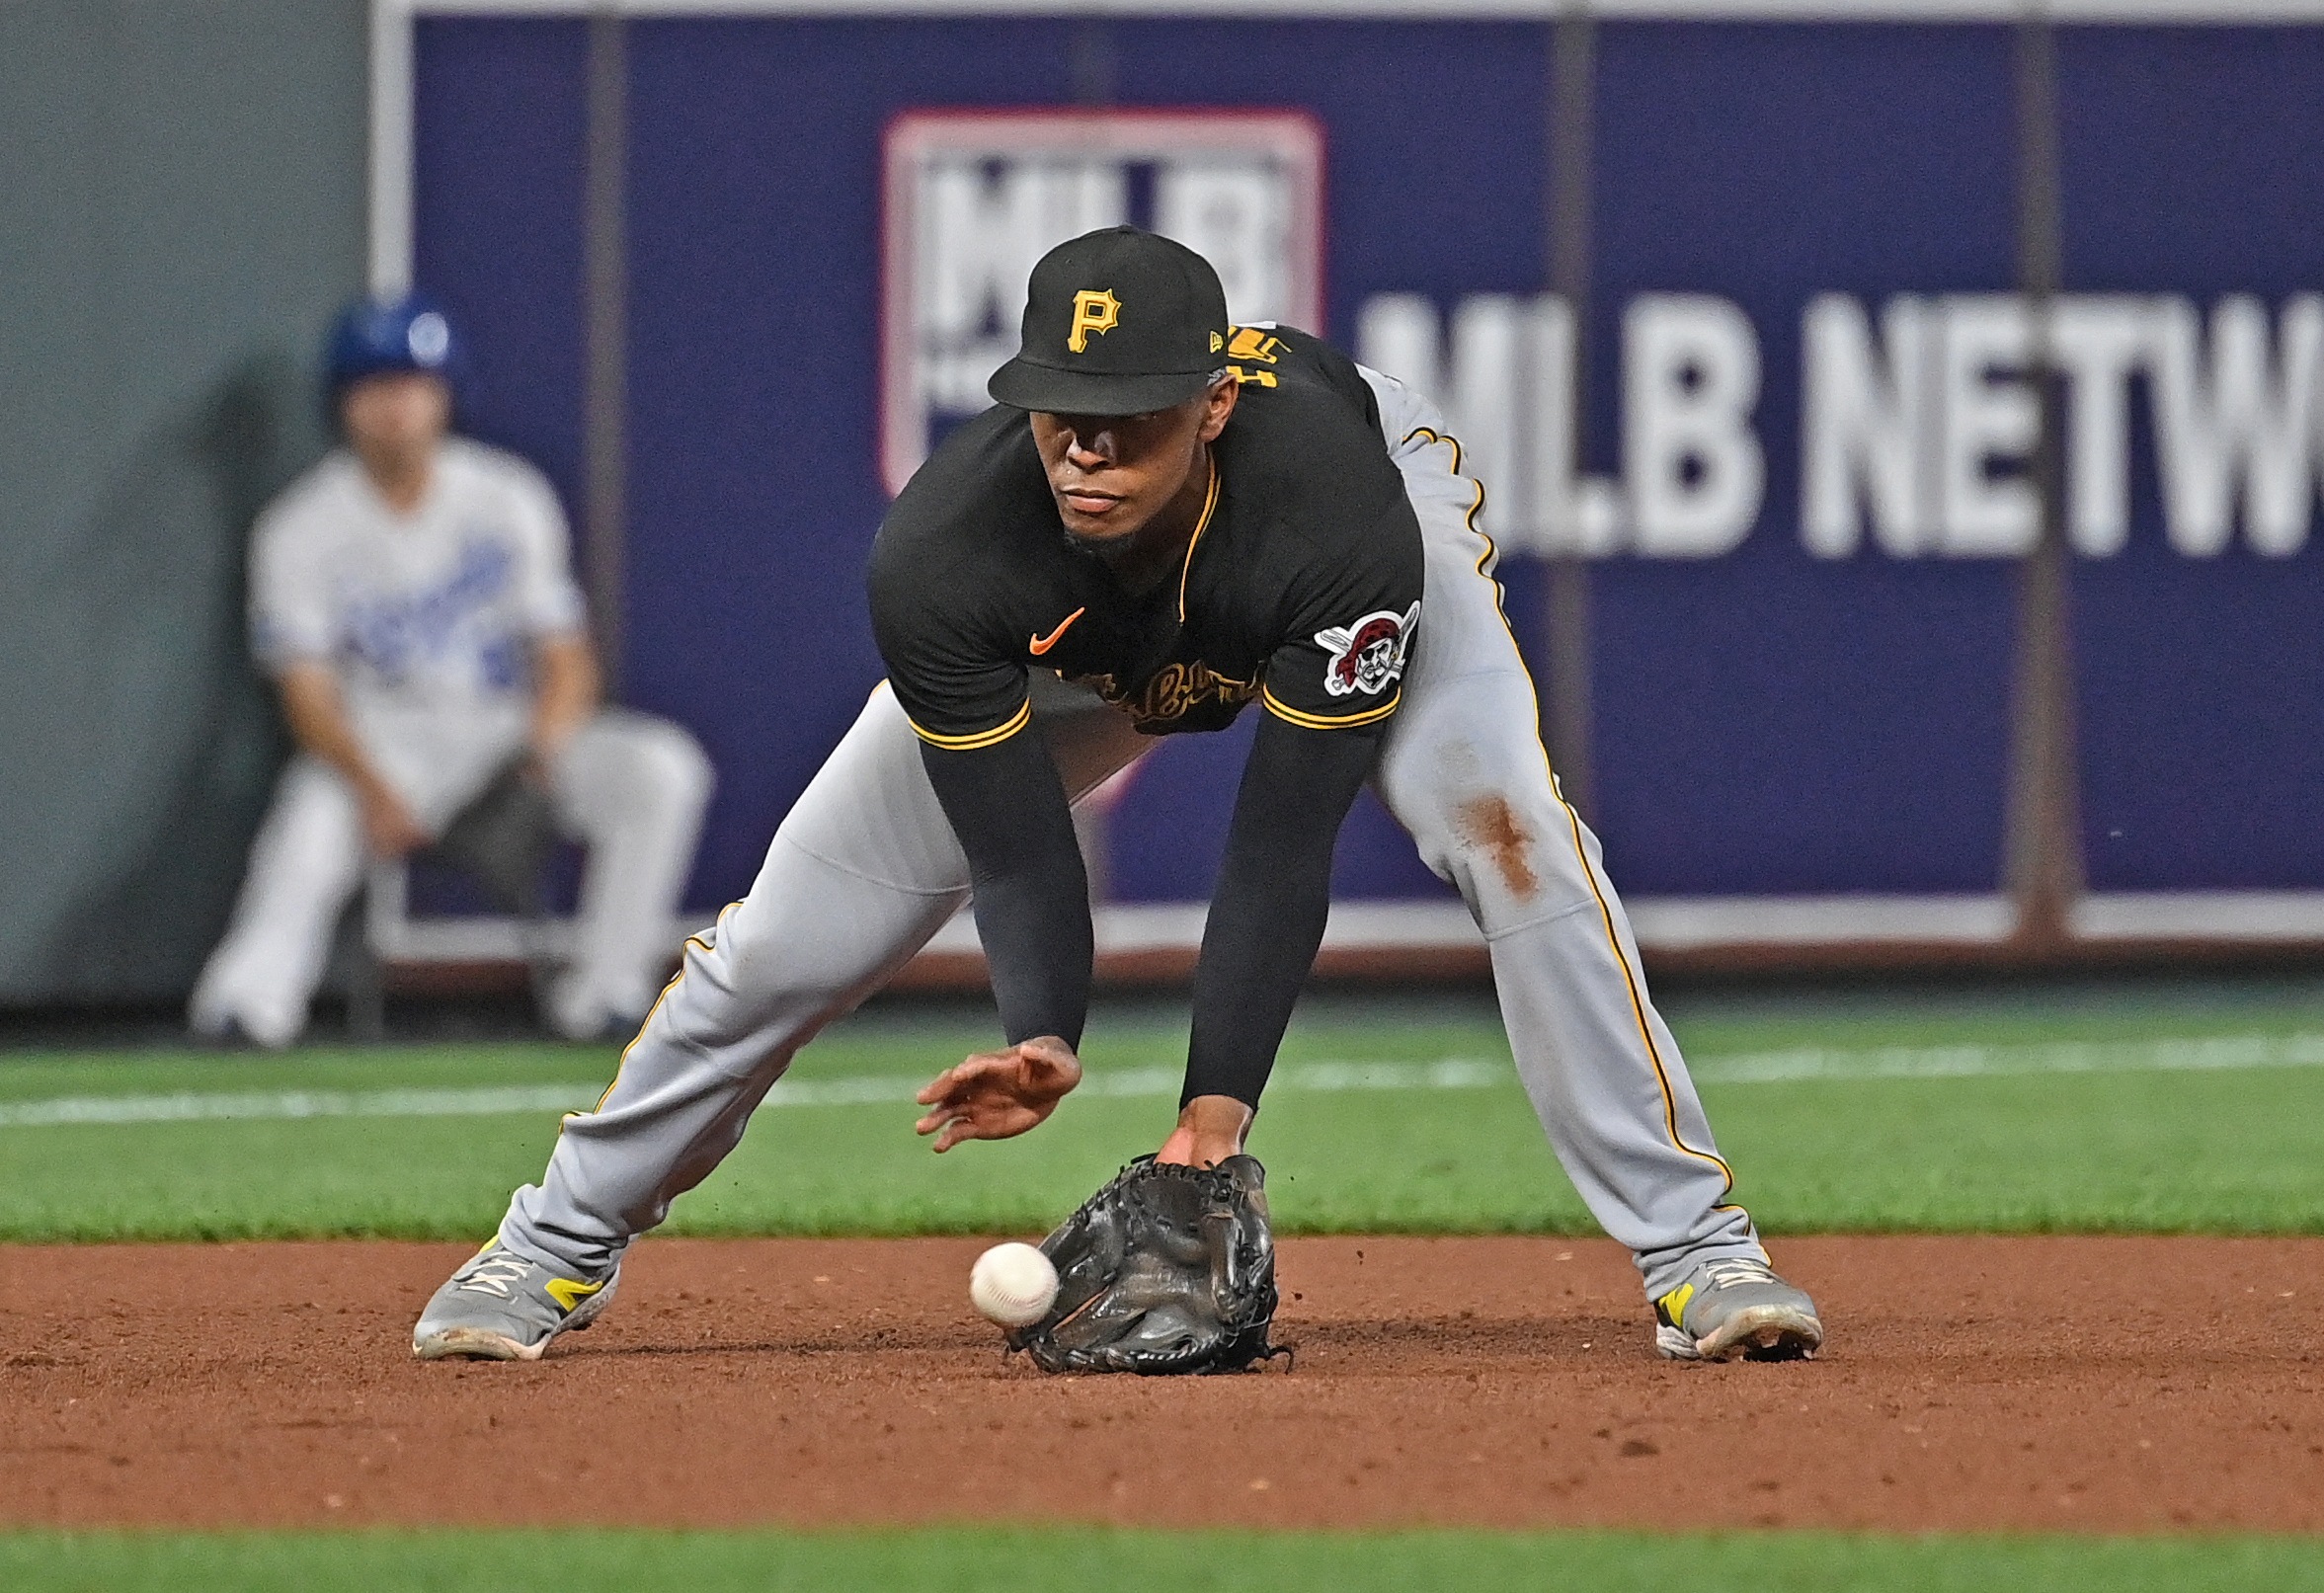 An outstanding effort': Johan Oviedo dazzles in complete-game gem, as  Pirates dispatch Royals